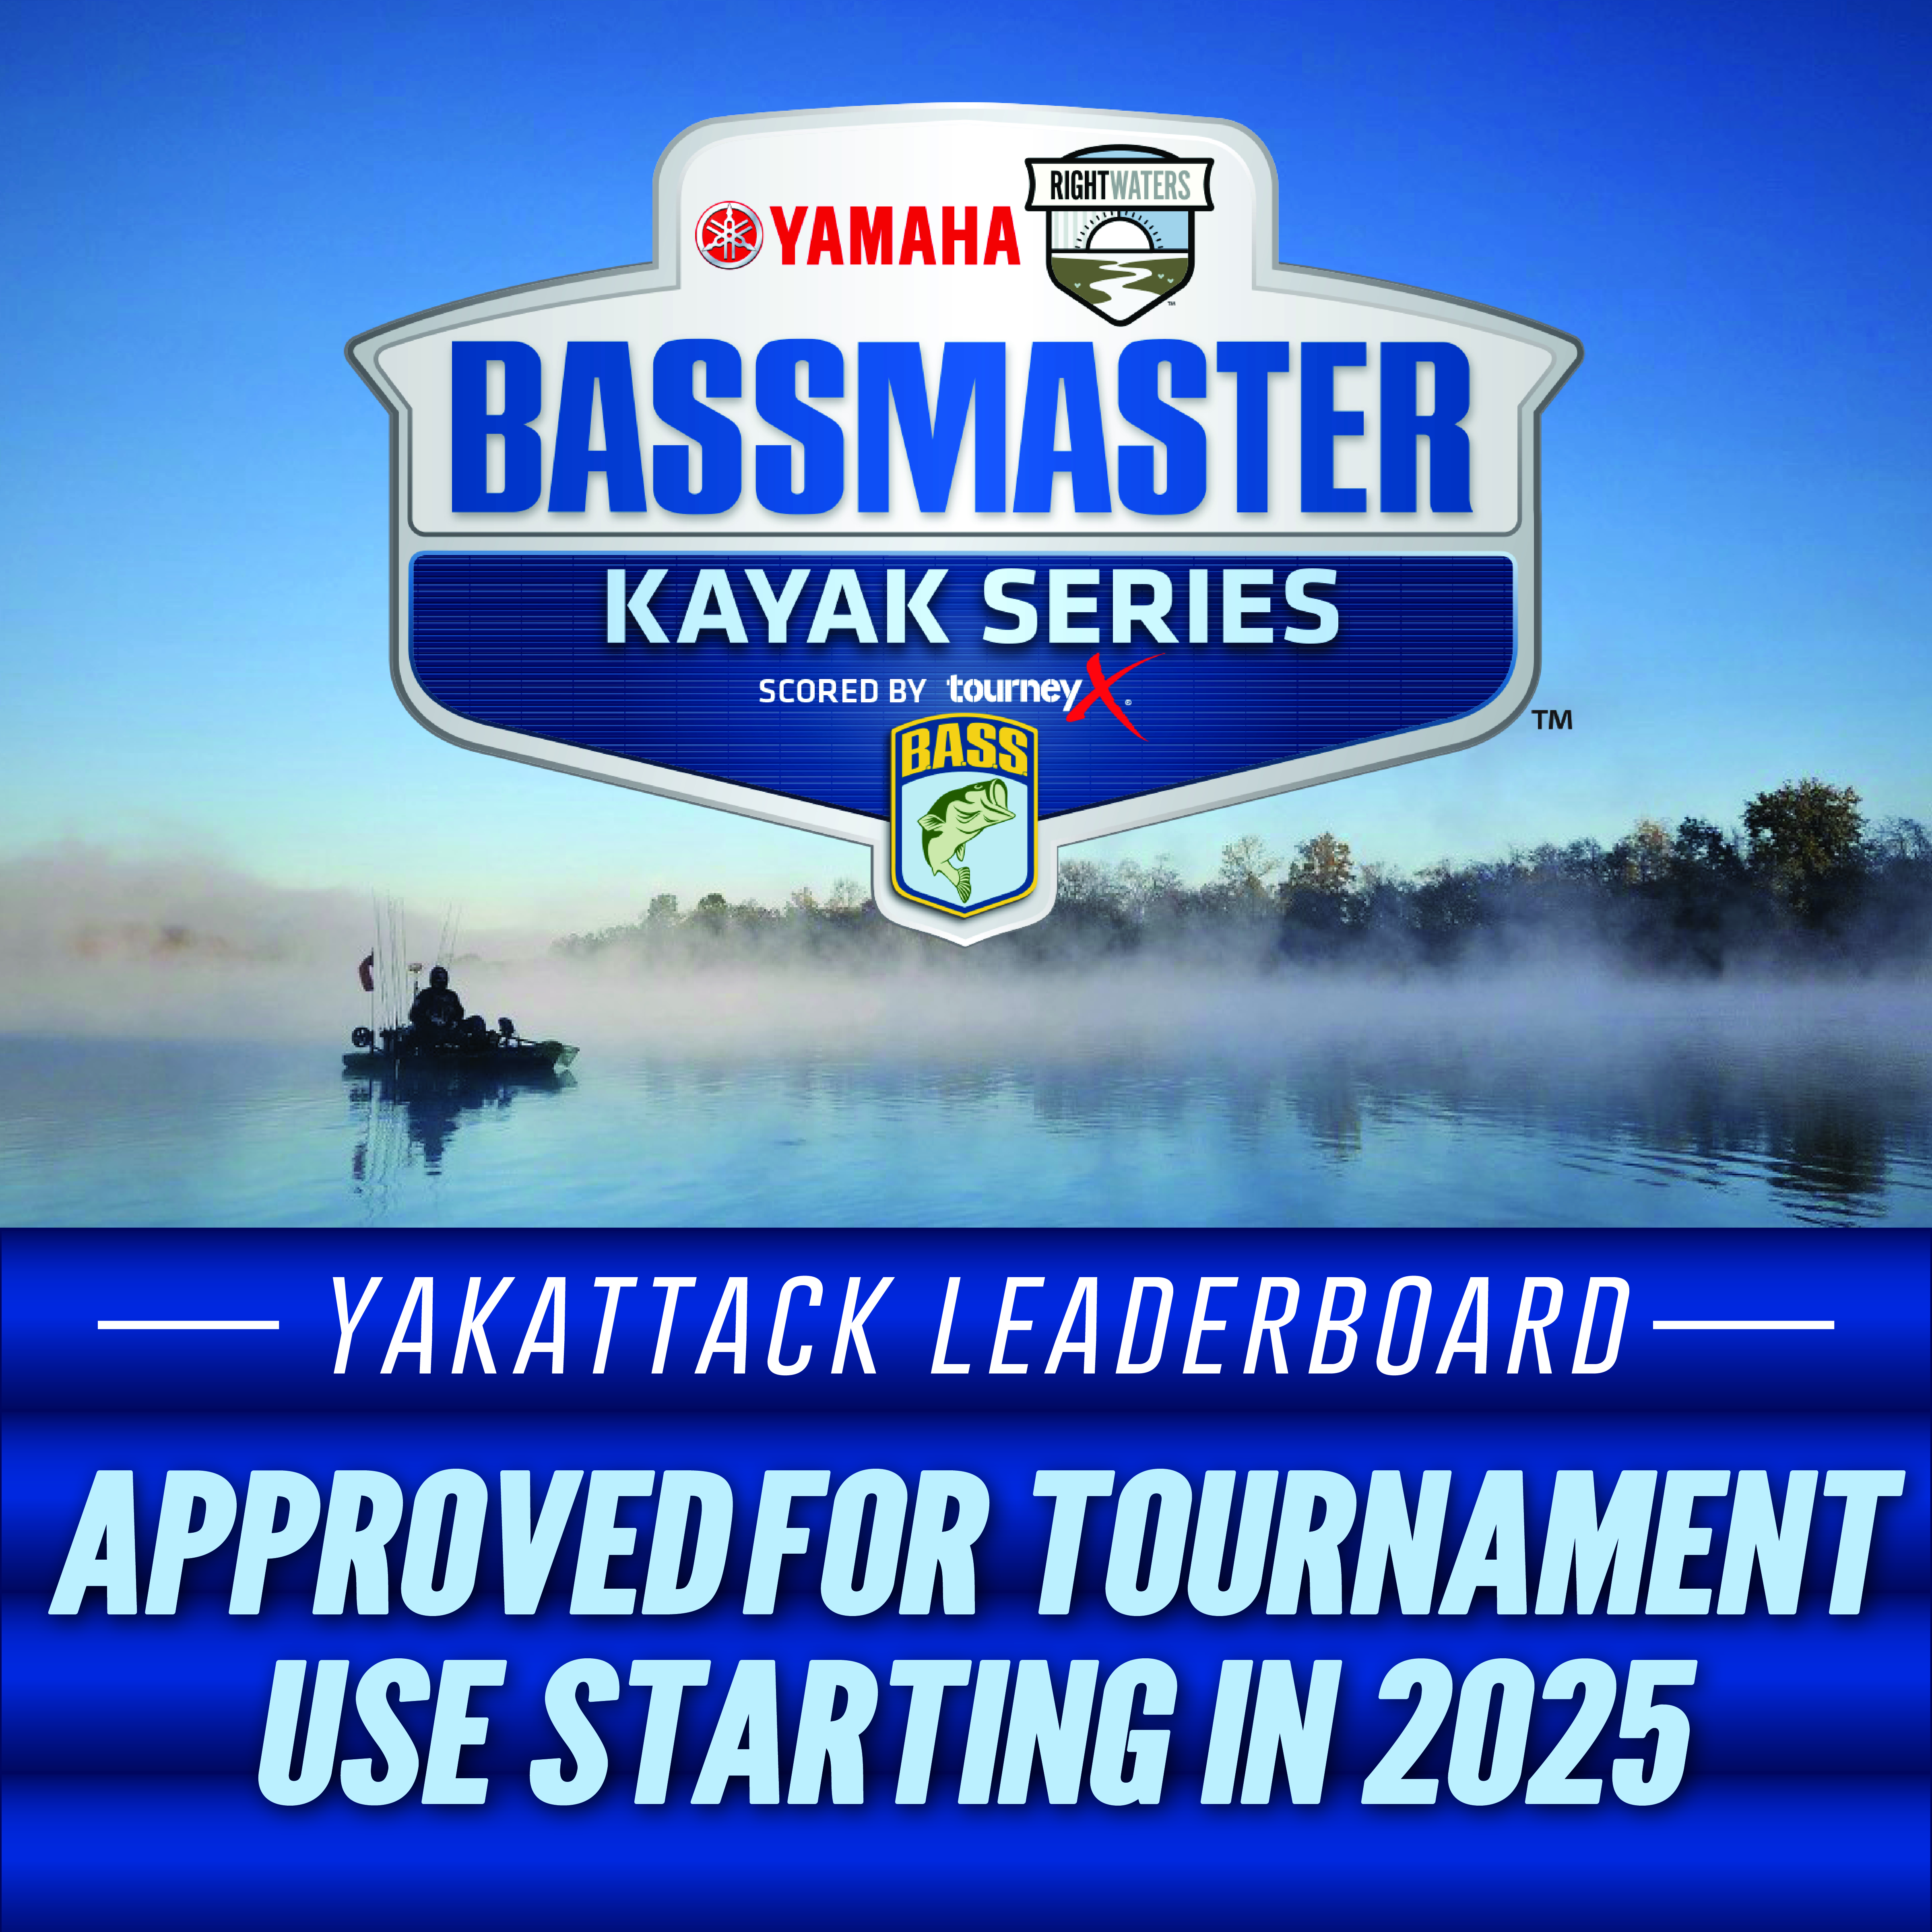 Bassmaster Kayak Series Approves the YakAttack LeaderBoard for 2025 tournament use